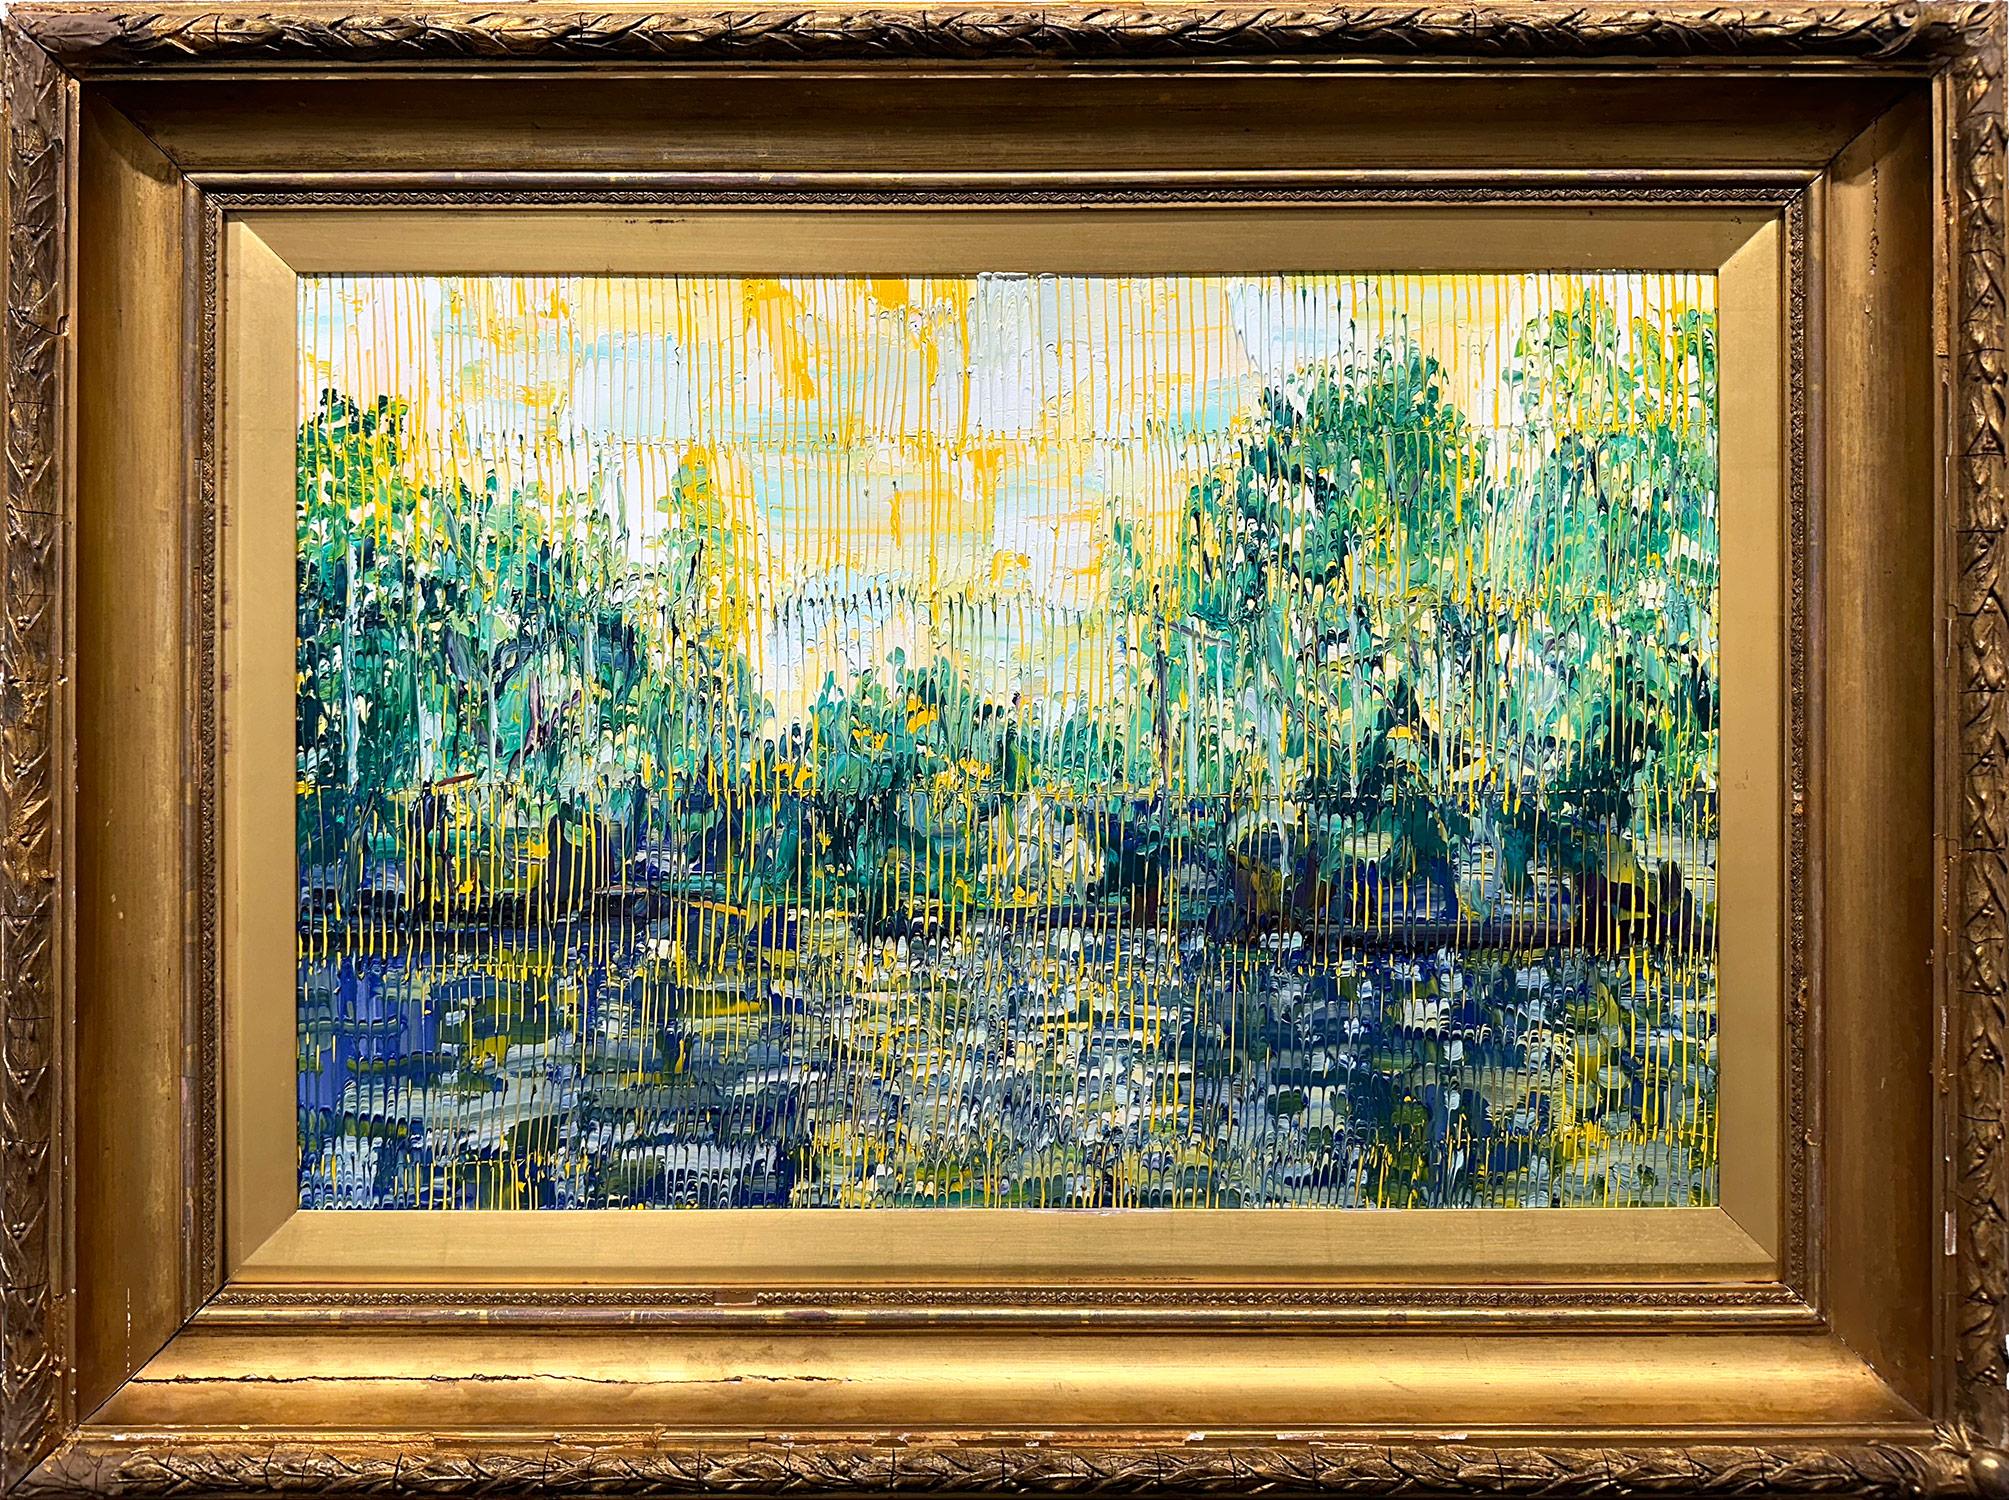 Hunt Slonem Abstract Painting - "Bayou Casino" Blue Yellow & Green toned Landscape Contemporary Oil Painting